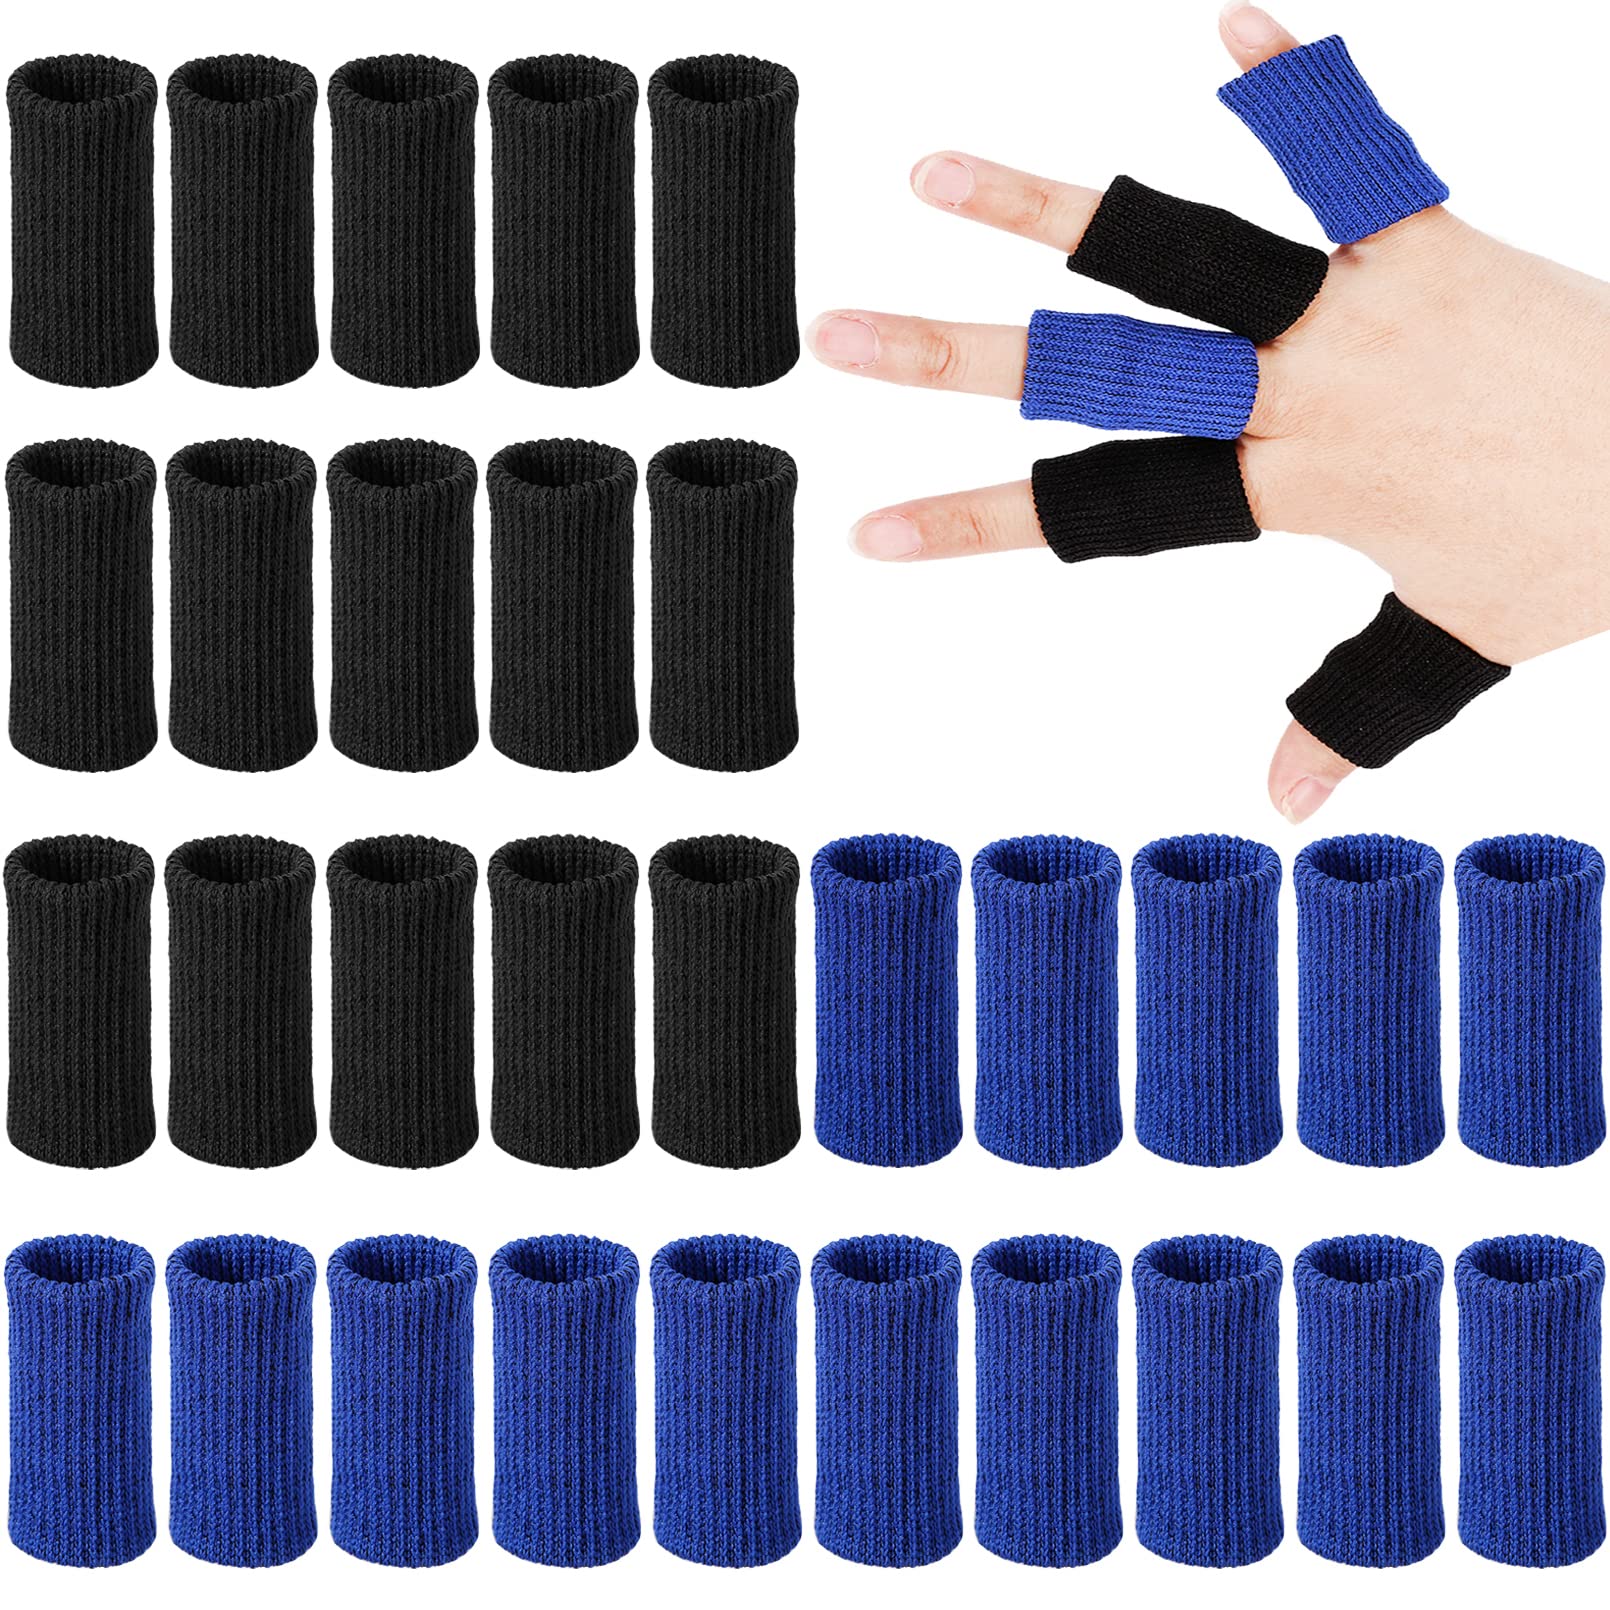 30 Pieces Finger Sleeves Elastic Compression Protector with 1 Storage Bag  Finger Compression Sleeves Elastic Thumb Sleeve Finger Protector Sleeve for  Relieving Pain Sports(Black + Blue)